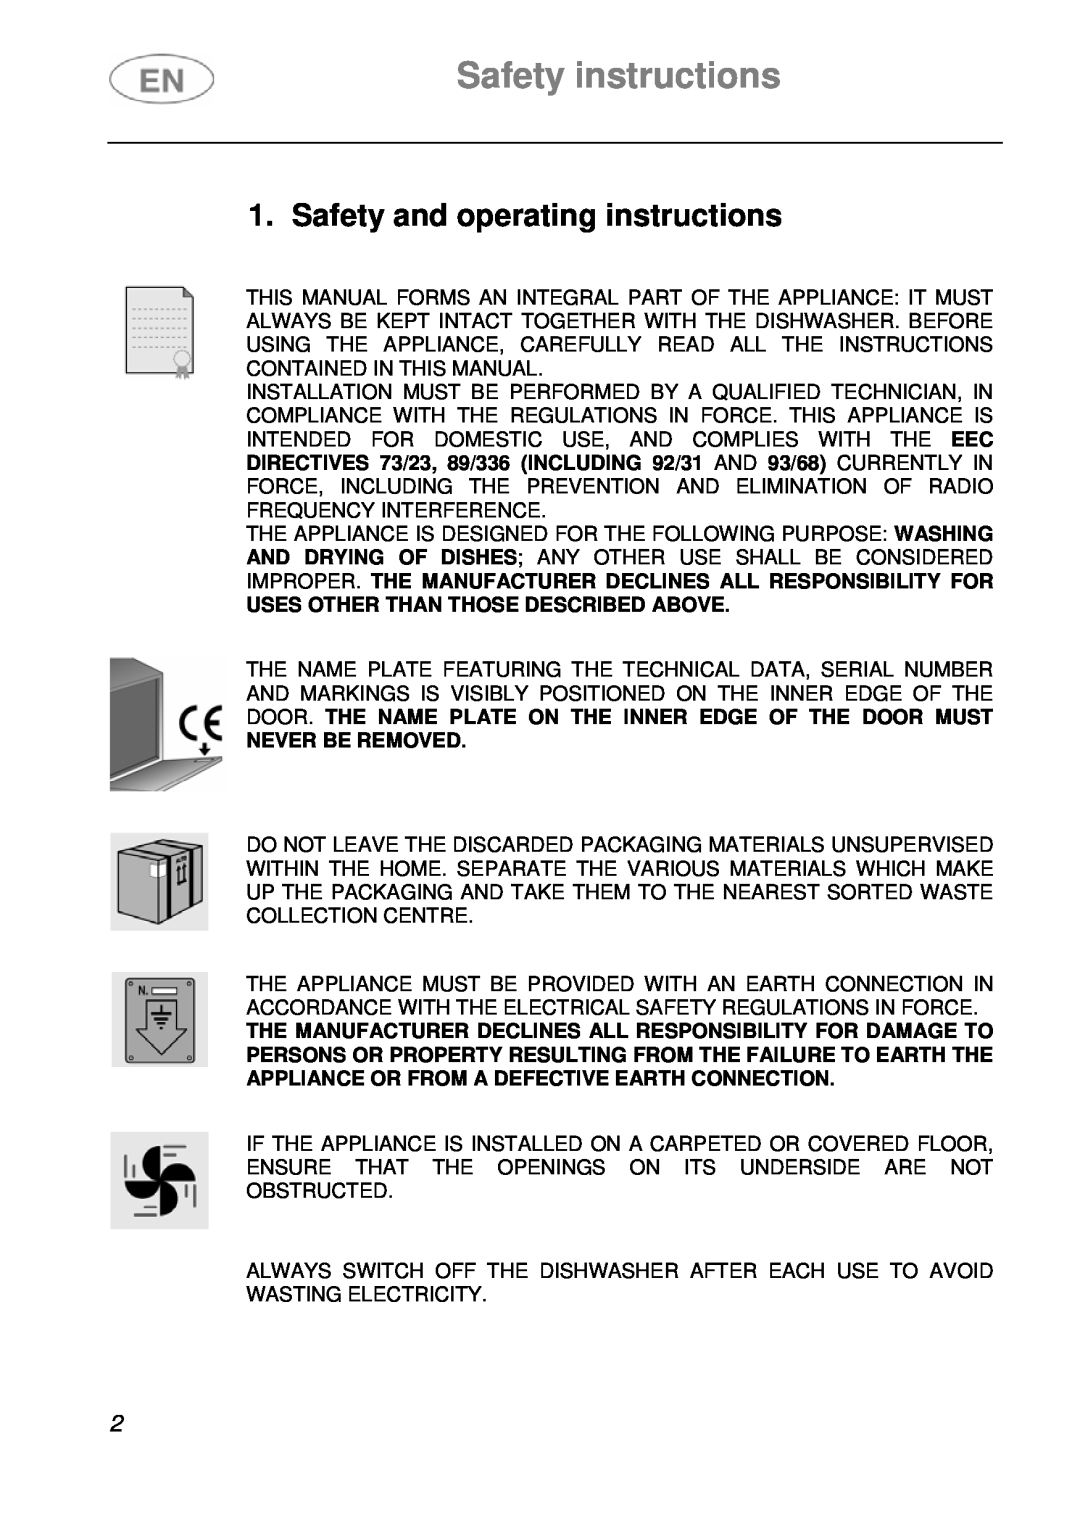 Smeg ST4108 manual Safety instructions, Safety and operating instructions 